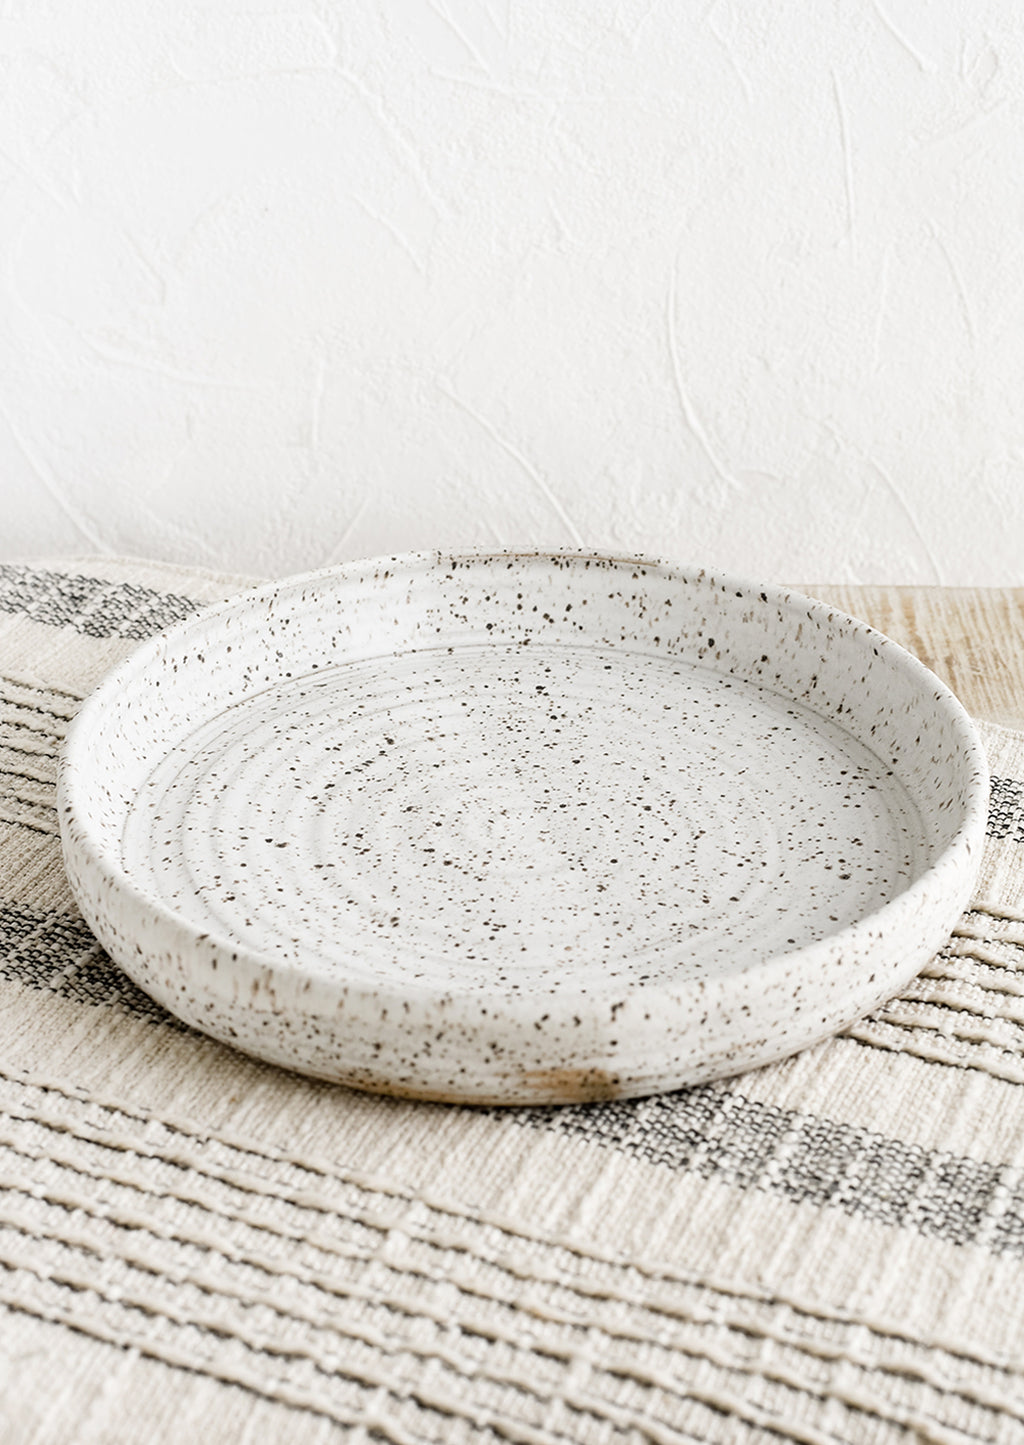 Speckled White: A shallow serving plate in speckled white.